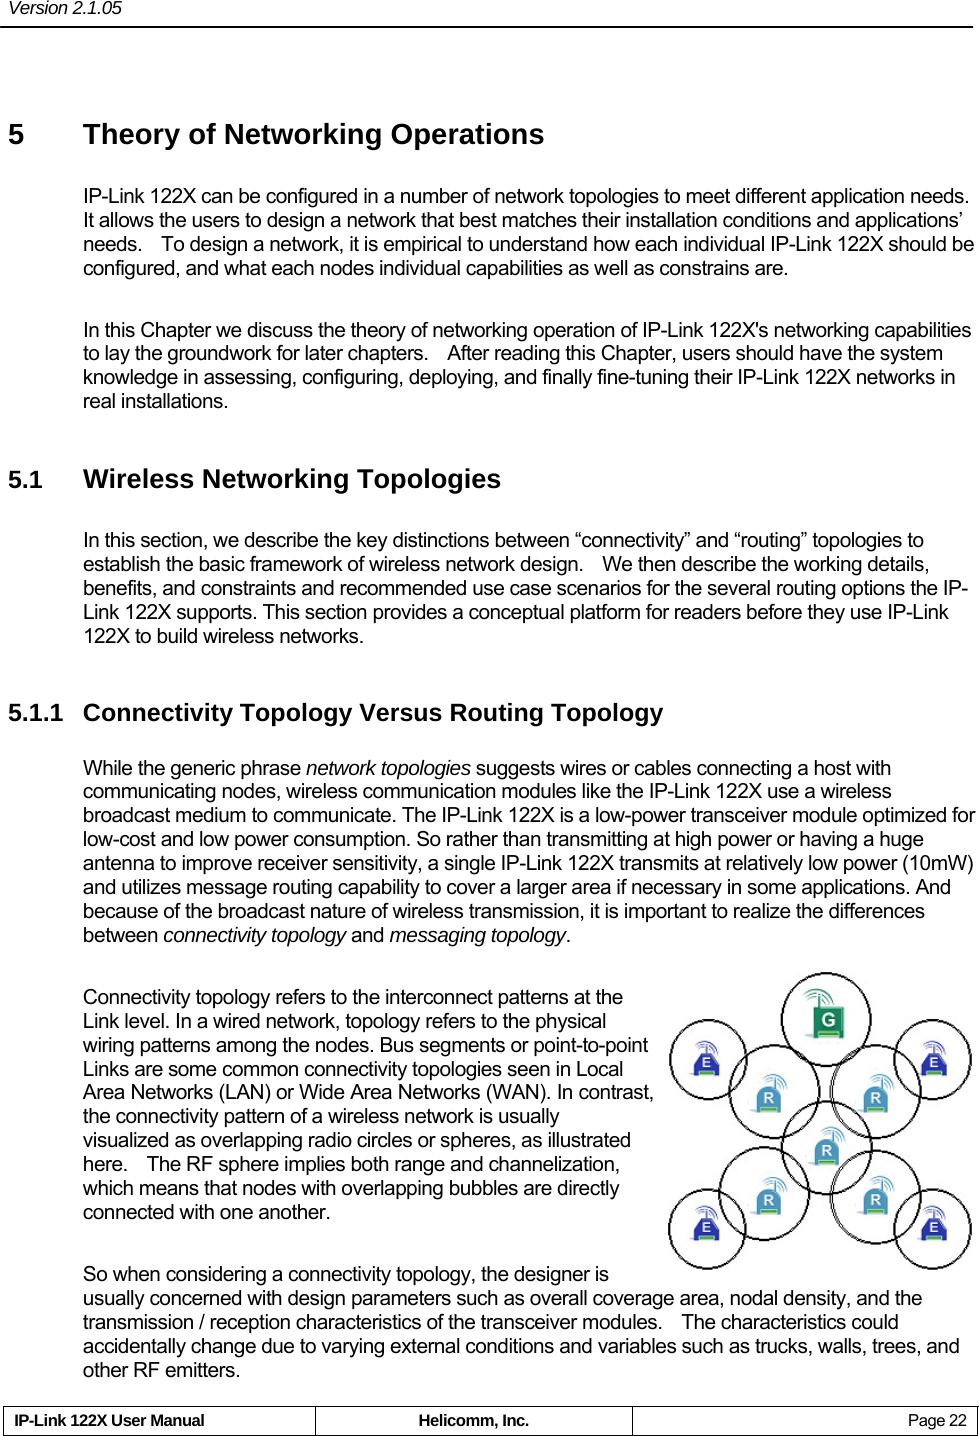 Version 2.1.05     IP-Link 122X User Manual  Helicomm, Inc.  Page 22 5  Theory of Networking Operations IP-Link 122X can be configured in a number of network topologies to meet different application needs.   It allows the users to design a network that best matches their installation conditions and applications’ needs.    To design a network, it is empirical to understand how each individual IP-Link 122X should be configured, and what each nodes individual capabilities as well as constrains are. In this Chapter we discuss the theory of networking operation of IP-Link 122X&apos;s networking capabilities to lay the groundwork for later chapters.    After reading this Chapter, users should have the system knowledge in assessing, configuring, deploying, and finally fine-tuning their IP-Link 122X networks in real installations. 5.1  Wireless Networking Topologies In this section, we describe the key distinctions between “connectivity” and “routing” topologies to establish the basic framework of wireless network design.    We then describe the working details, benefits, and constraints and recommended use case scenarios for the several routing options the IP-Link 122X supports. This section provides a conceptual platform for readers before they use IP-Link 122X to build wireless networks. 5.1.1 Connectivity Topology Versus Routing Topology While the generic phrase network topologies suggests wires or cables connecting a host with communicating nodes, wireless communication modules like the IP-Link 122X use a wireless broadcast medium to communicate. The IP-Link 122X is a low-power transceiver module optimized for low-cost and low power consumption. So rather than transmitting at high power or having a huge antenna to improve receiver sensitivity, a single IP-Link 122X transmits at relatively low power (10mW) and utilizes message routing capability to cover a larger area if necessary in some applications. And because of the broadcast nature of wireless transmission, it is important to realize the differences between connectivity topology and messaging topology. Connectivity topology refers to the interconnect patterns at the Link level. In a wired network, topology refers to the physical wiring patterns among the nodes. Bus segments or point-to-point Links are some common connectivity topologies seen in Local Area Networks (LAN) or Wide Area Networks (WAN). In contrast, the connectivity pattern of a wireless network is usually visualized as overlapping radio circles or spheres, as illustrated here.    The RF sphere implies both range and channelization, which means that nodes with overlapping bubbles are directly connected with one another. So when considering a connectivity topology, the designer is usually concerned with design parameters such as overall coverage area, nodal density, and the transmission / reception characteristics of the transceiver modules.    The characteristics could accidentally change due to varying external conditions and variables such as trucks, walls, trees, and other RF emitters. 